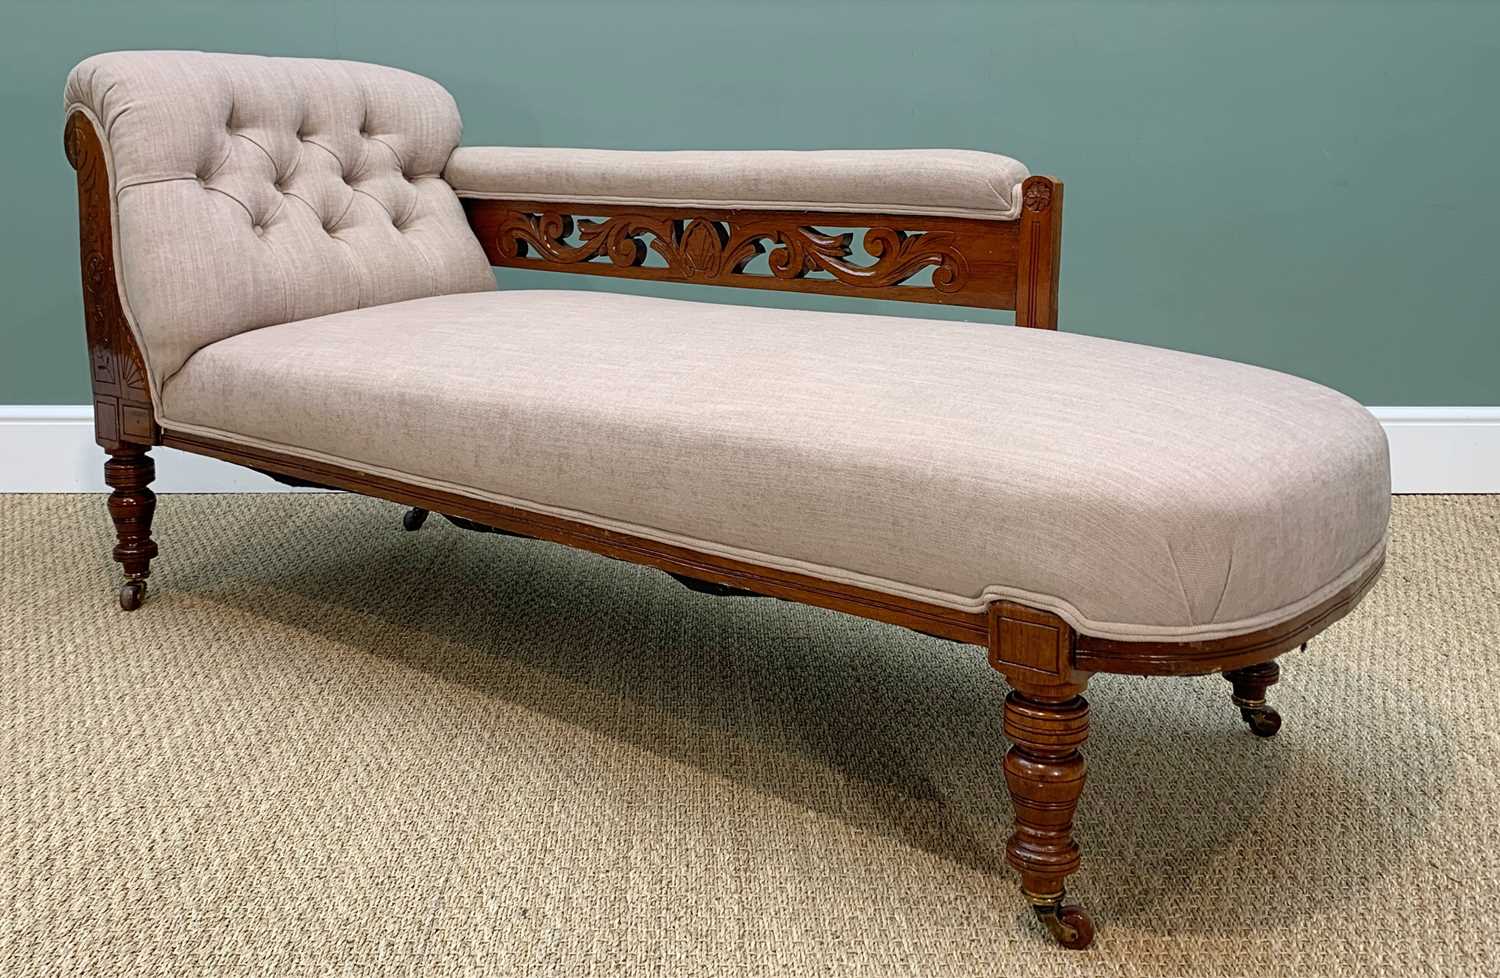 MATCHING VICTORIAN WALNUT CHAISE LONGUE & ARMCHAIR, with carved arms, on brown ceramic castors, - Image 3 of 10